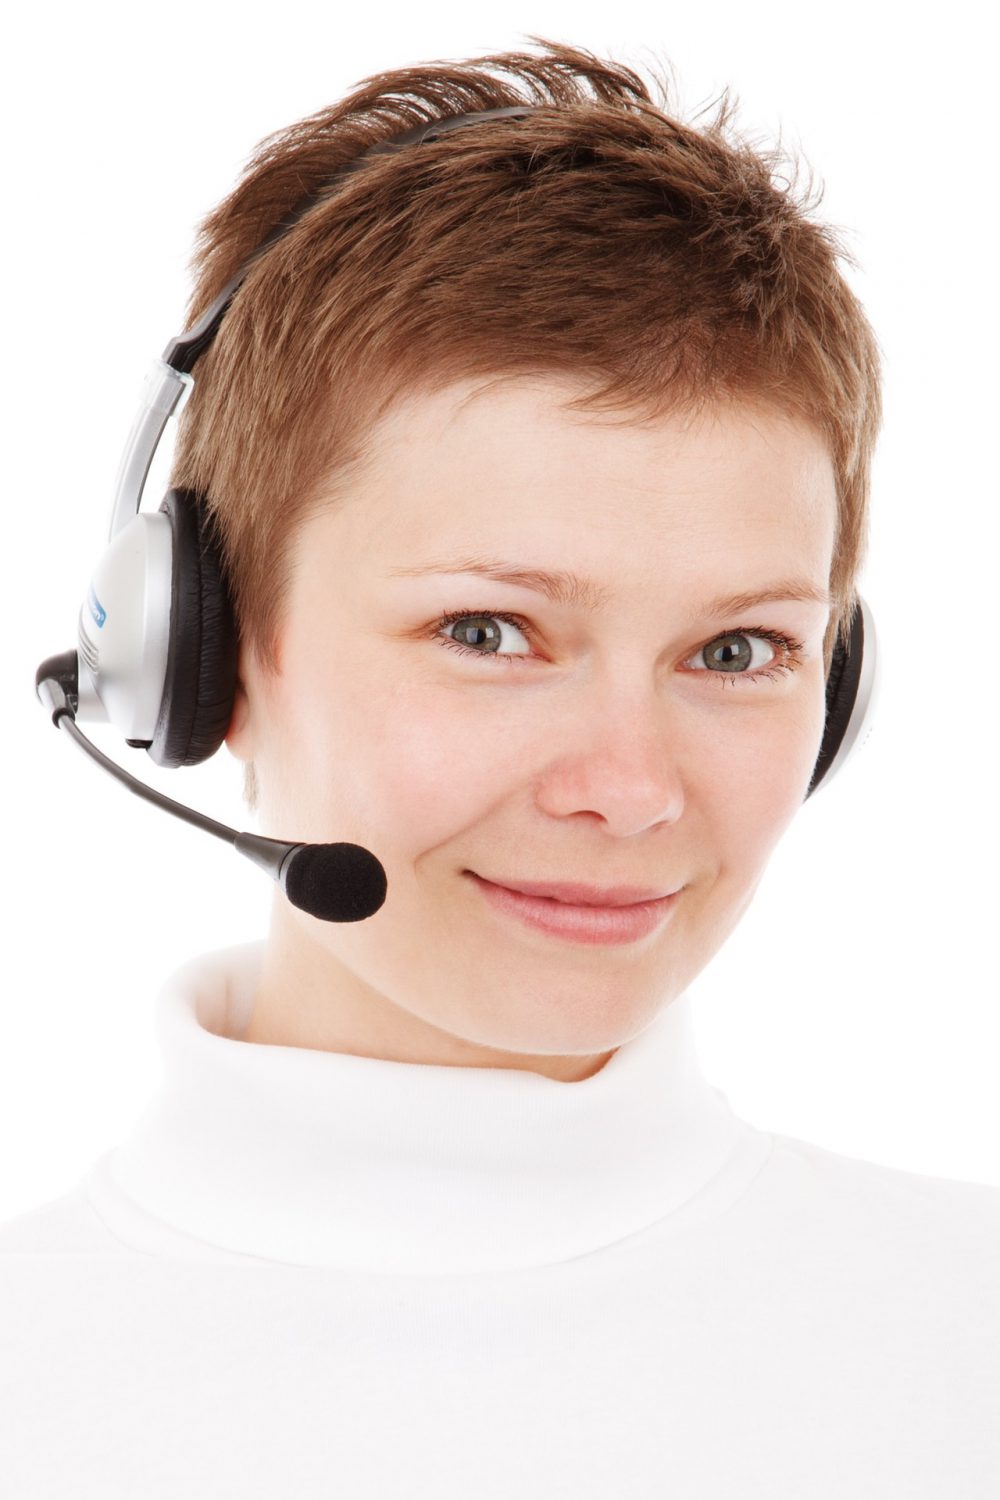 How to Avoid Getting Hoodwinked by Phony Help Desk Contact Information